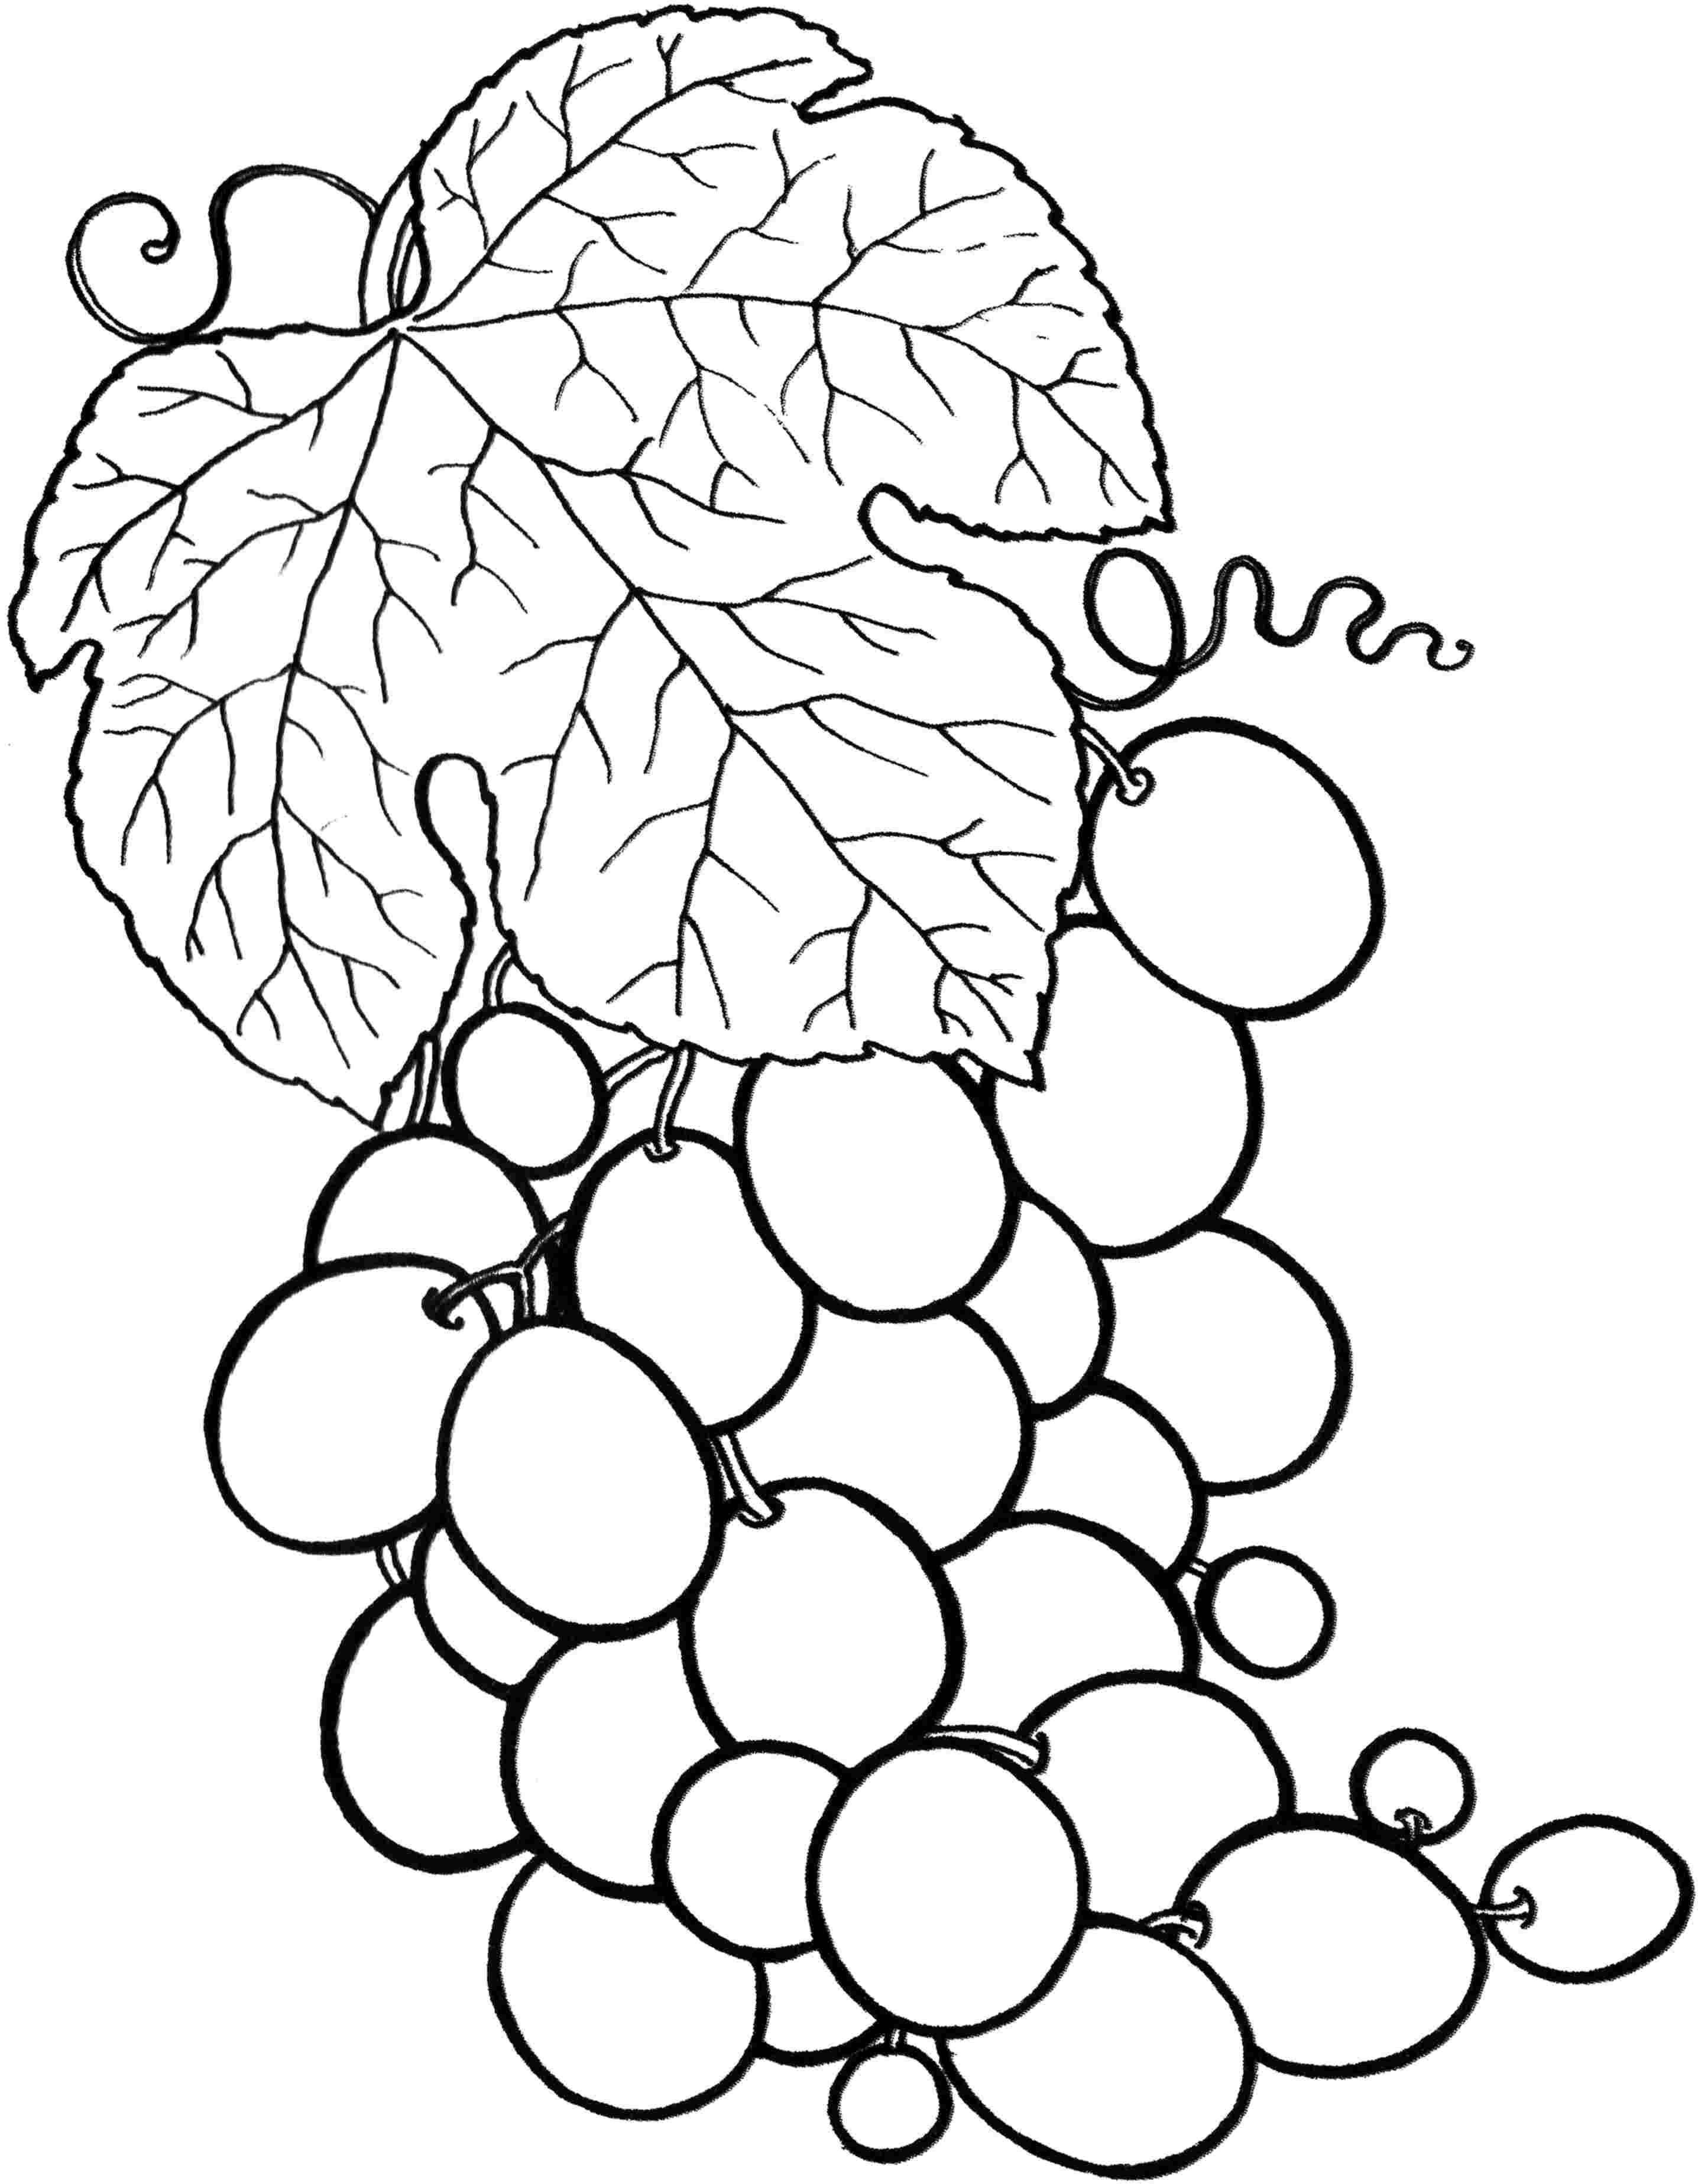 Coloring Drawing of grapes. Category berries. Tags:  grapes.